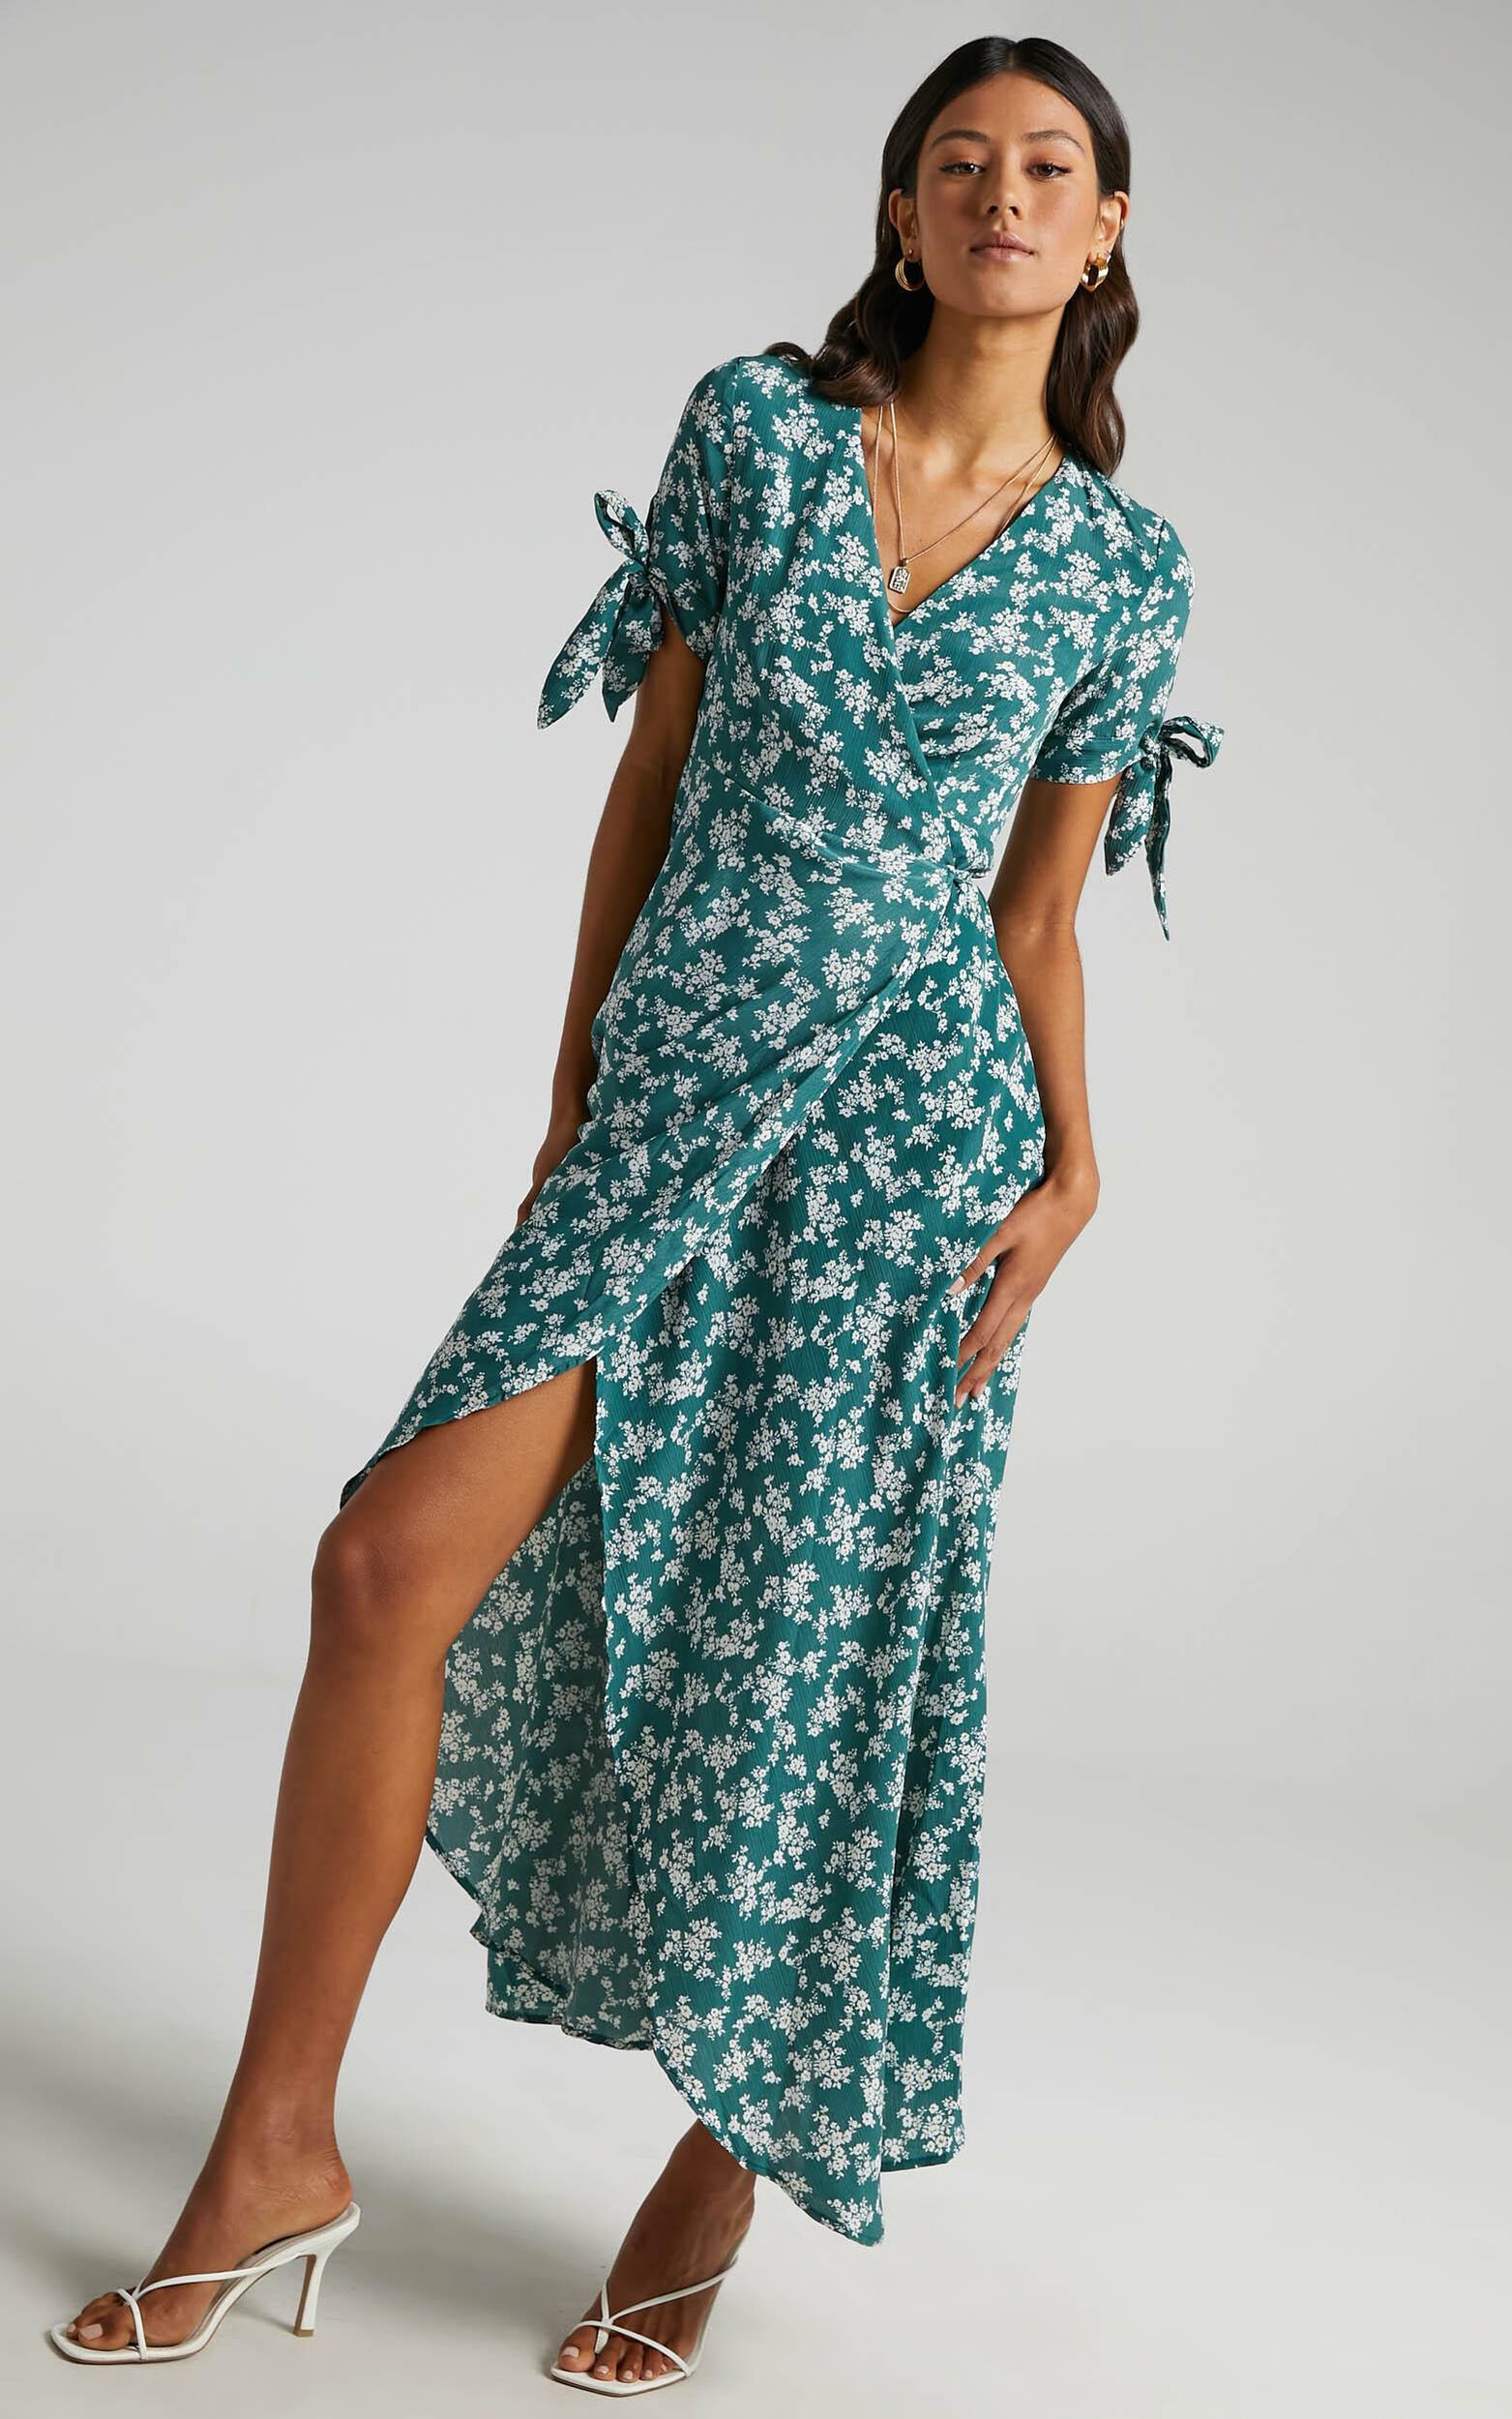 Picking It Up Wrap Maxi Dress in Teal Floral - 06, GRN1